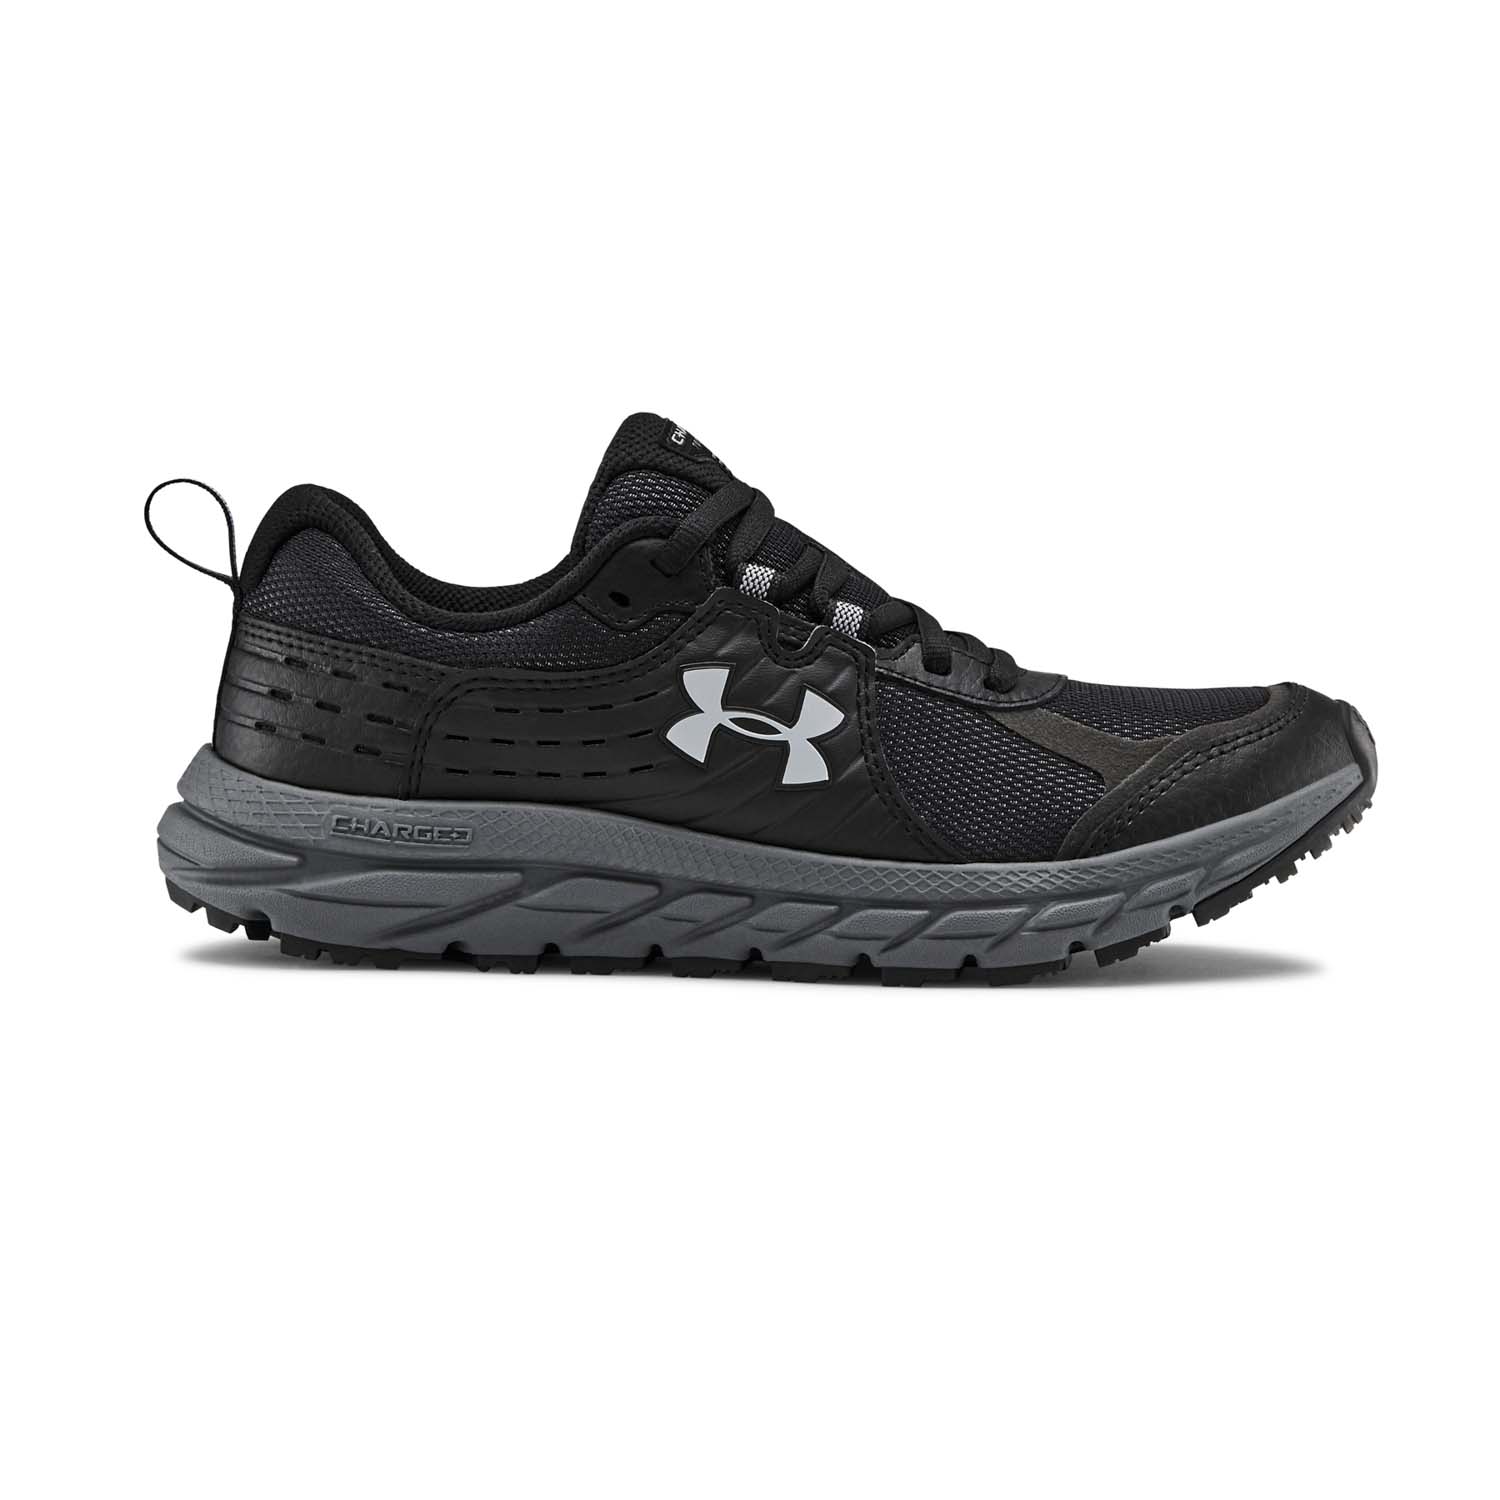 Under Armour Womens Charged Toccoa 2 Hiking Shoe